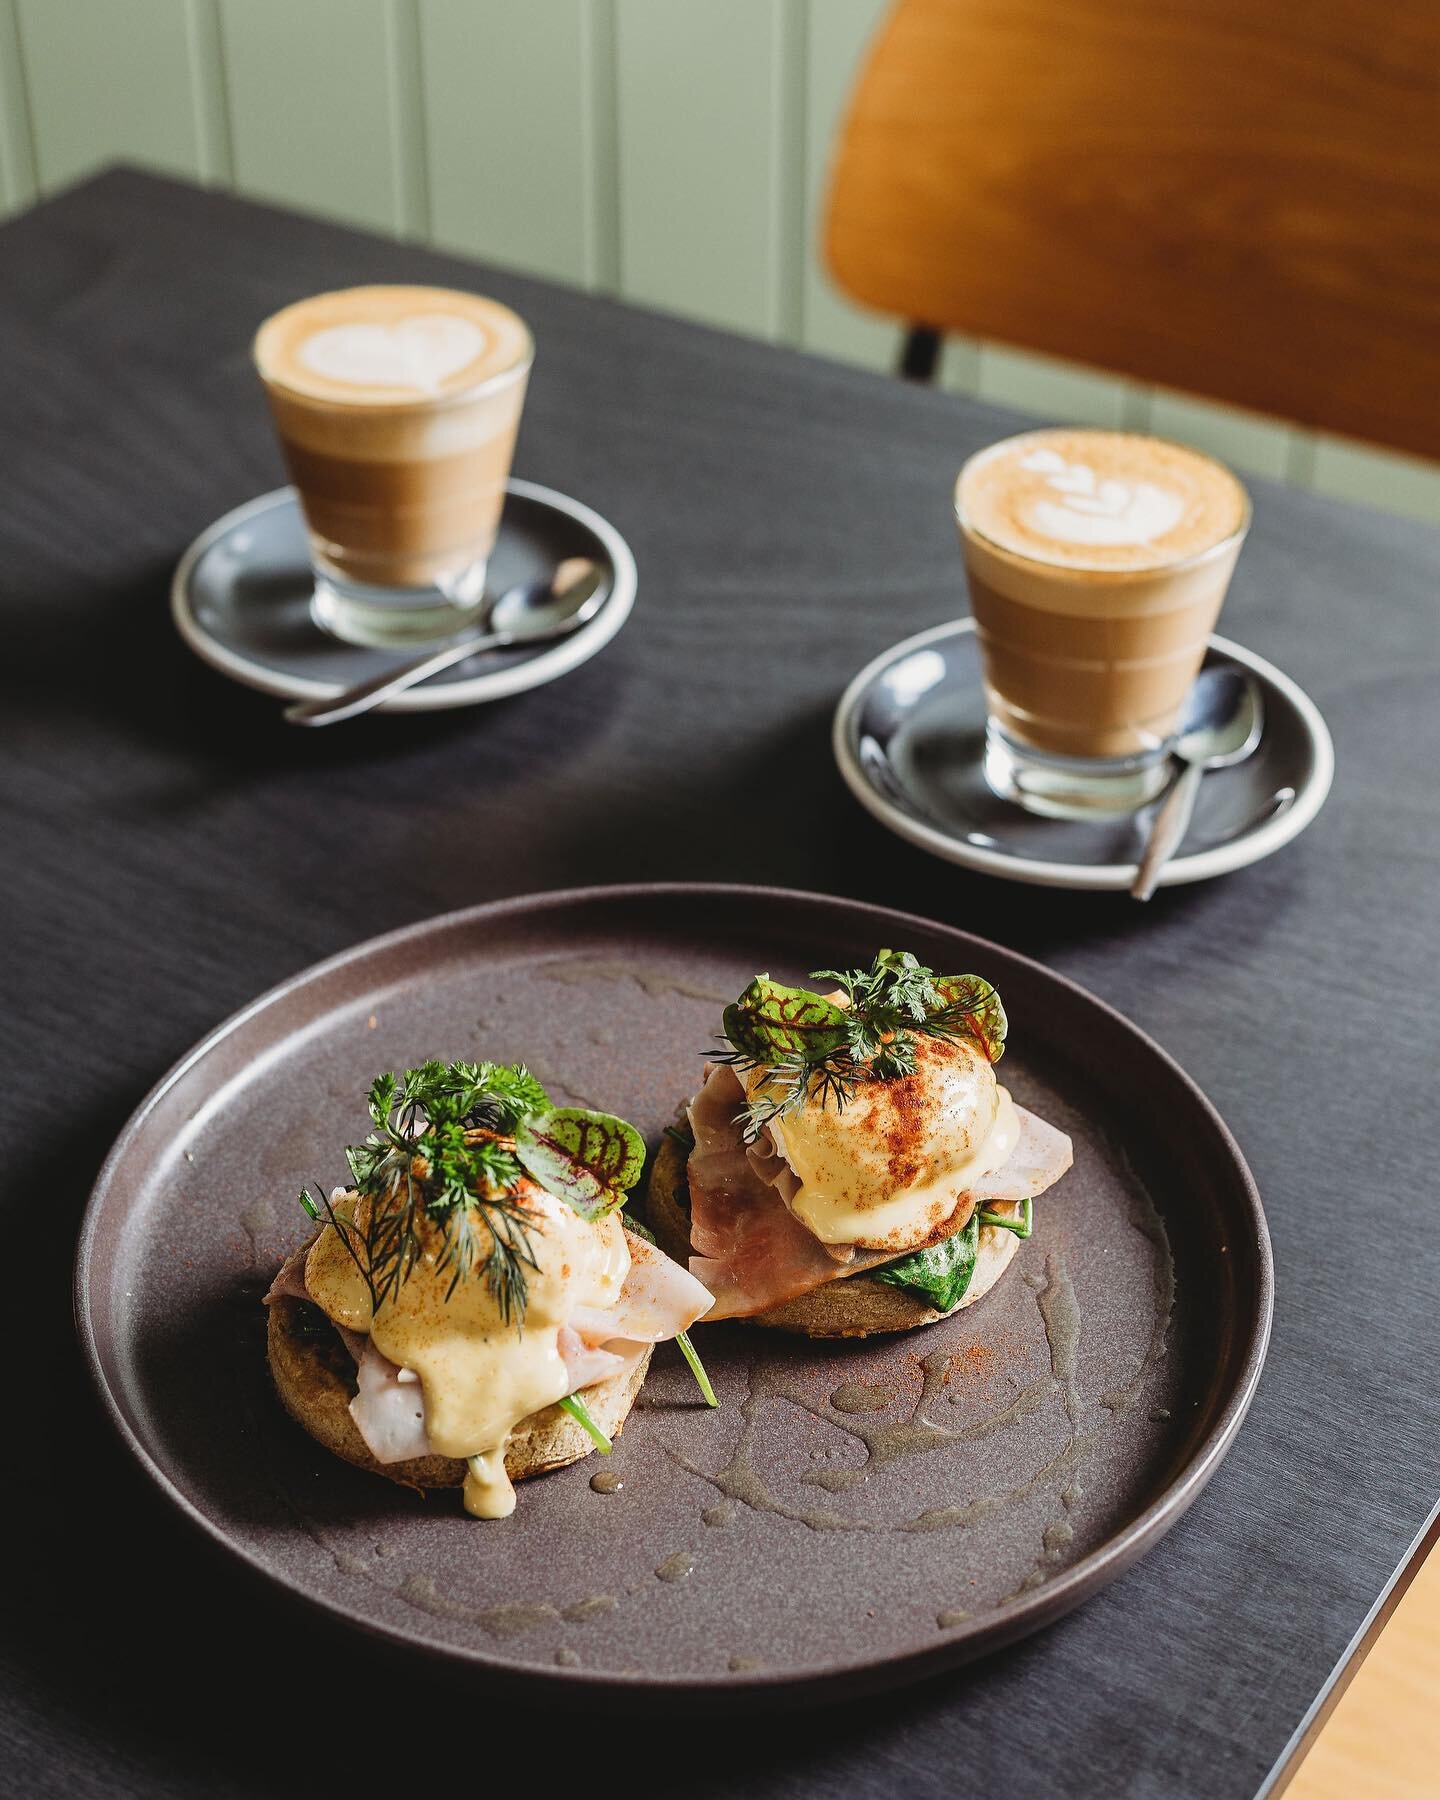 Plated up: our new eggs benny 🍳

Atop handmade crumpets, you'll discover baby spinach, doubled spoked ham, poached free-range eggs topped with lime hollandaise with smokey paprika. 

Have you tried our new menu yet?